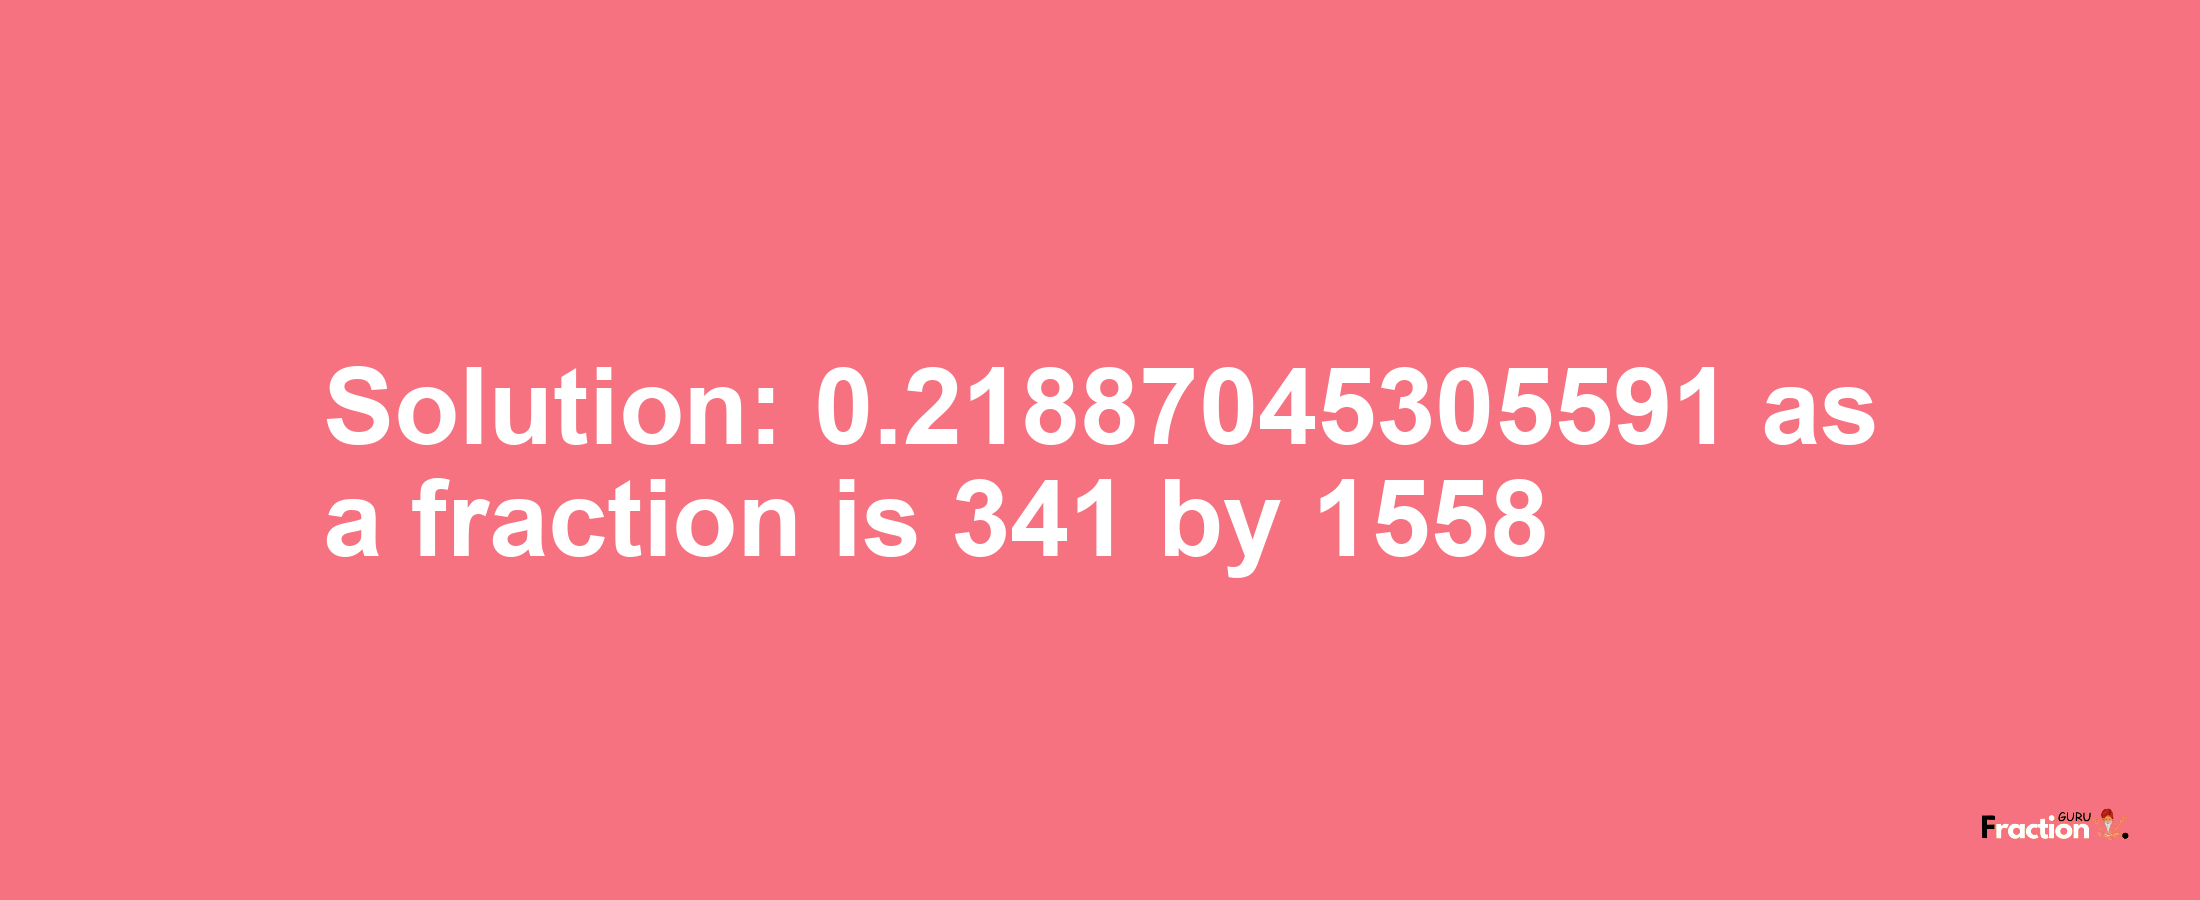 Solution:0.21887045305591 as a fraction is 341/1558